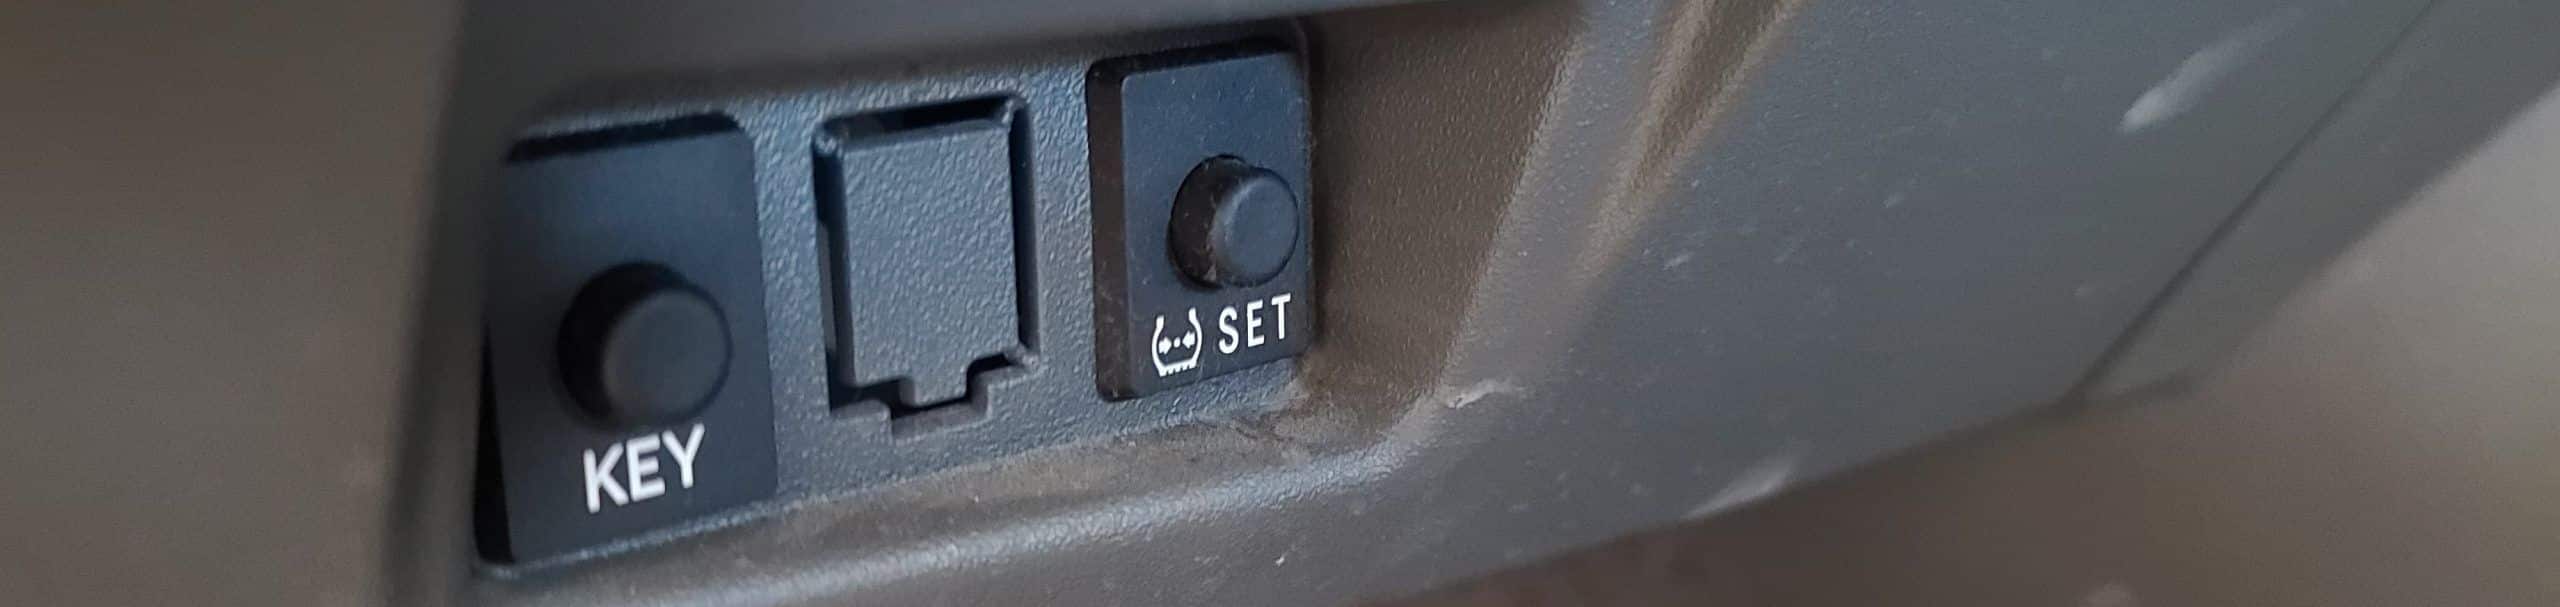 Tire pressure light reset button on lower dashboard, Toyota Prius